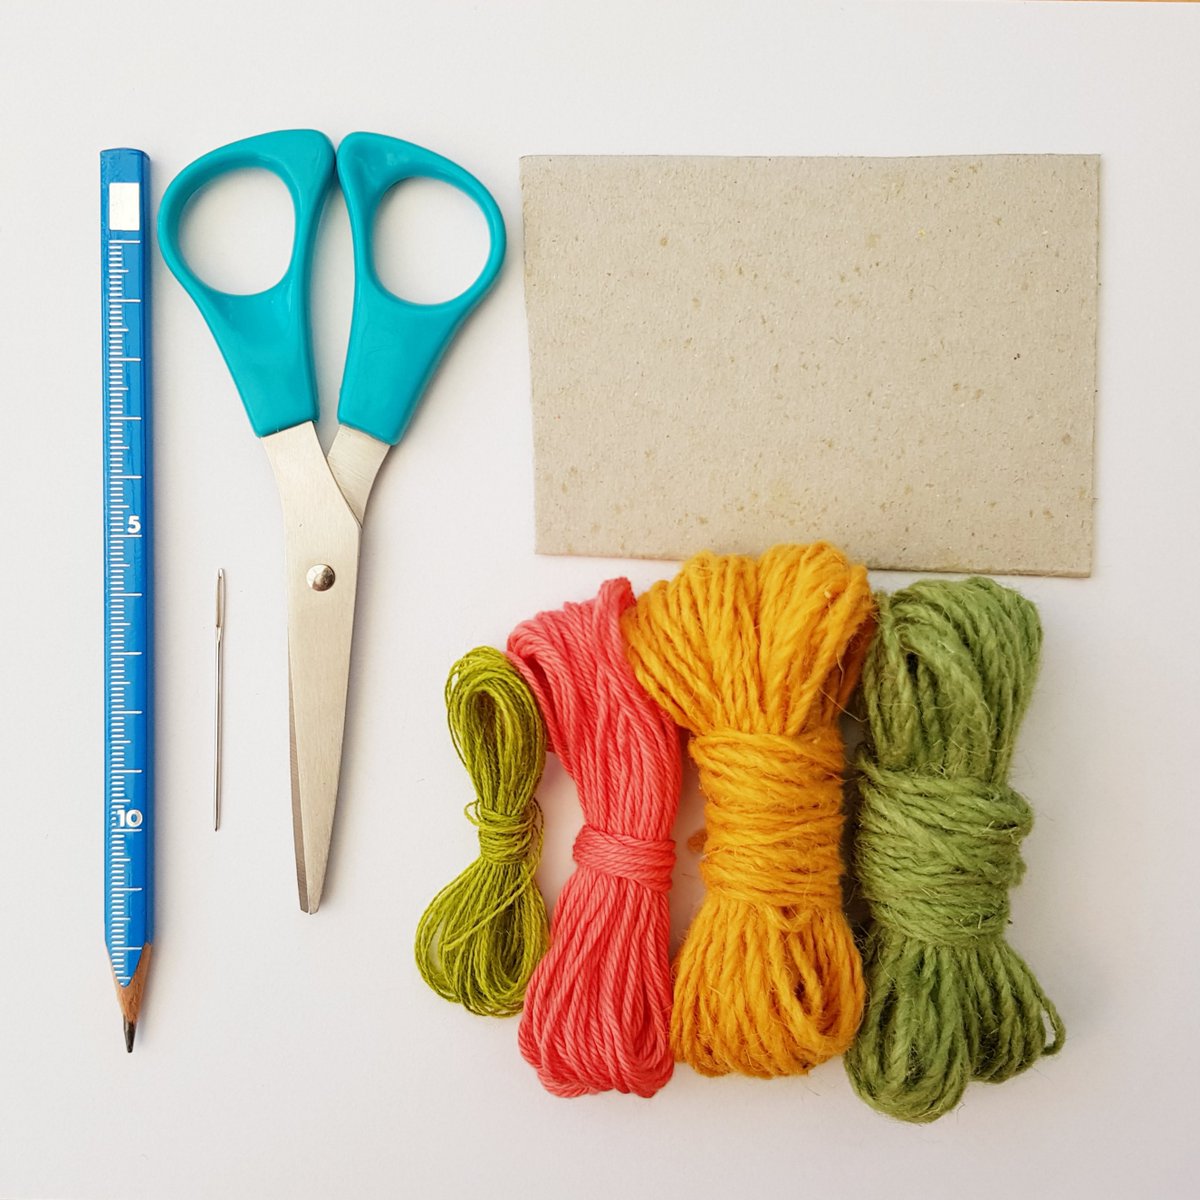 You will need:PencilScissorsNeedleCardboard - eg old shoe box / cereal packetYarn/thread/string - use whatever you have available